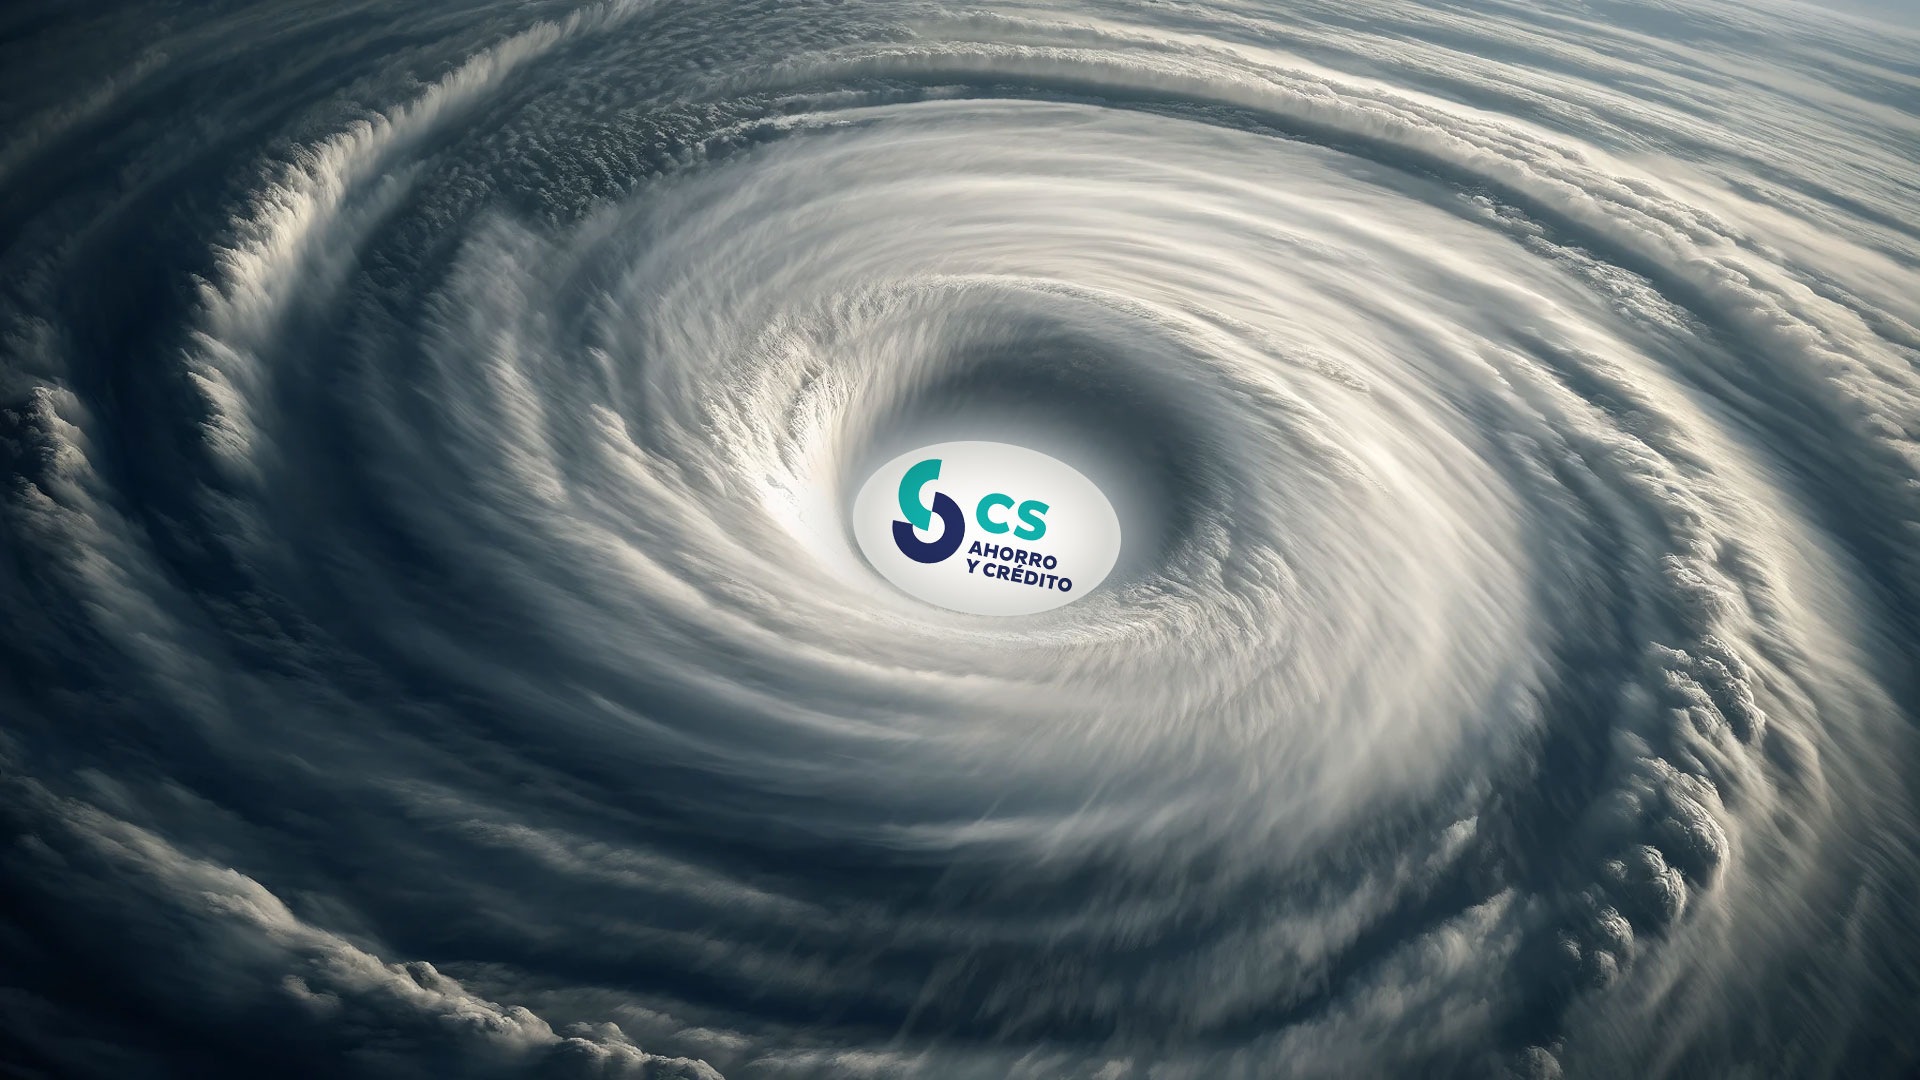 Coopeservidores in the eye of the hurricane after Financial Intervention due to Insolvency Risk